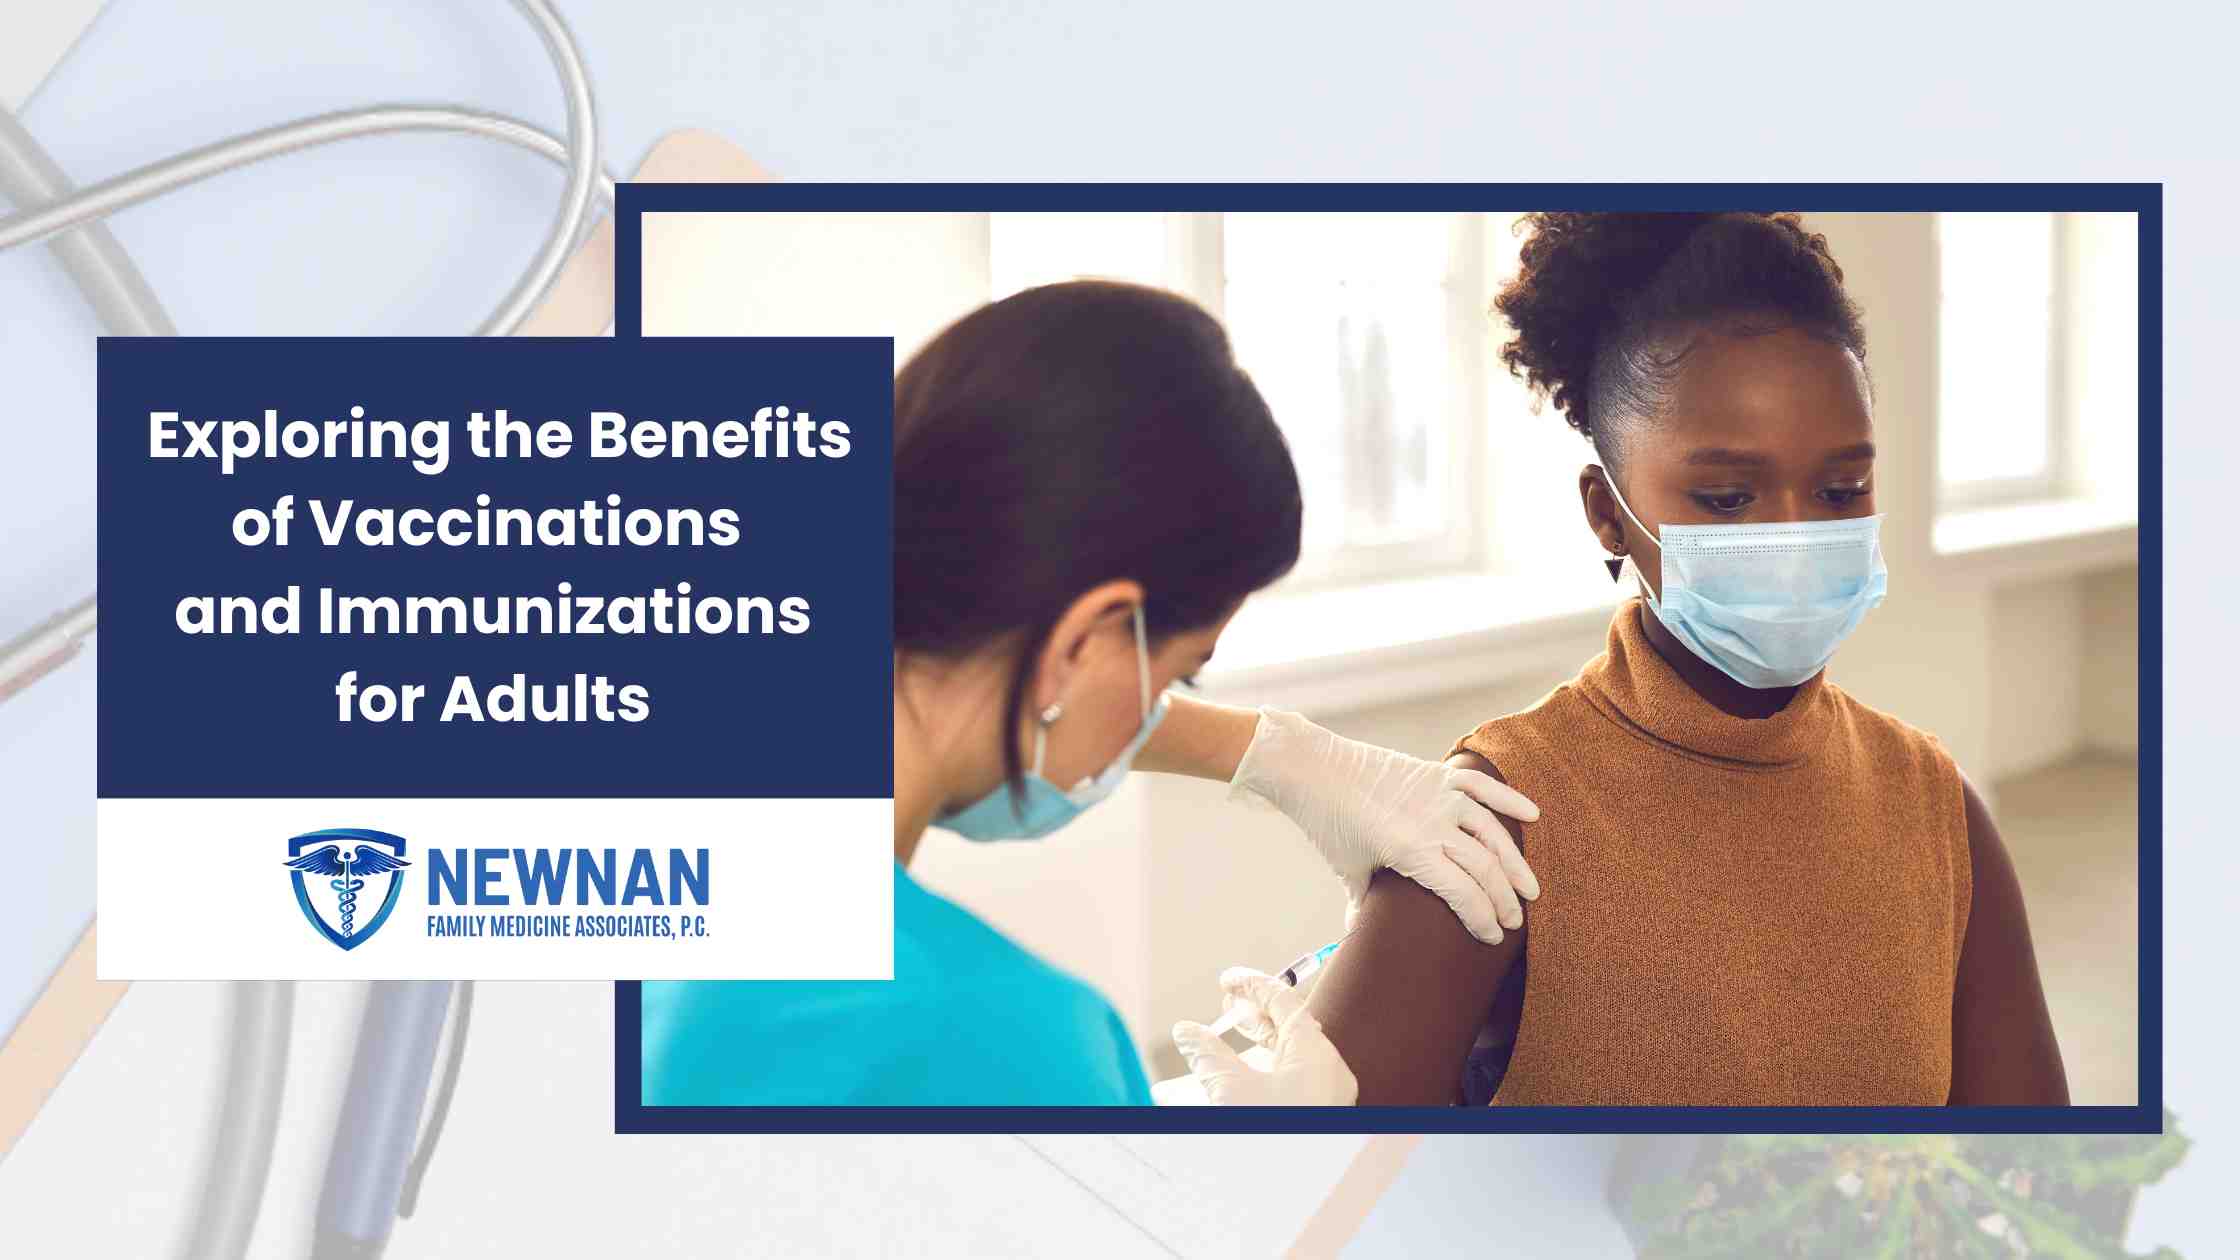  Exploring the Benefits of Vaccinations and Immunizations for Adults